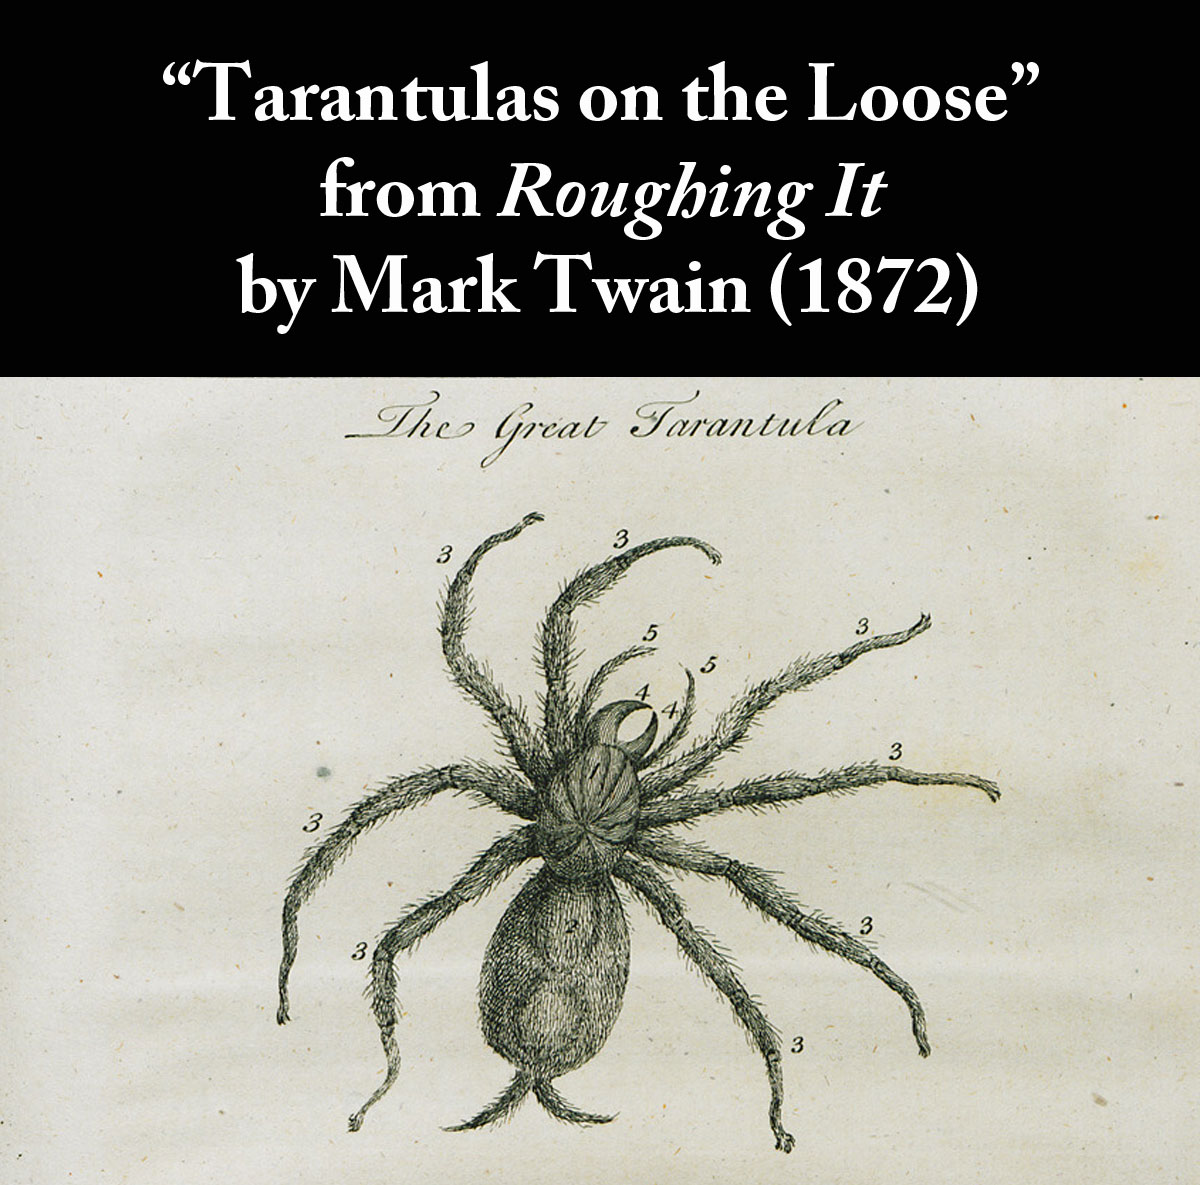 Tarantulas on the Loose from Roughing It by Mark Twain (1872)